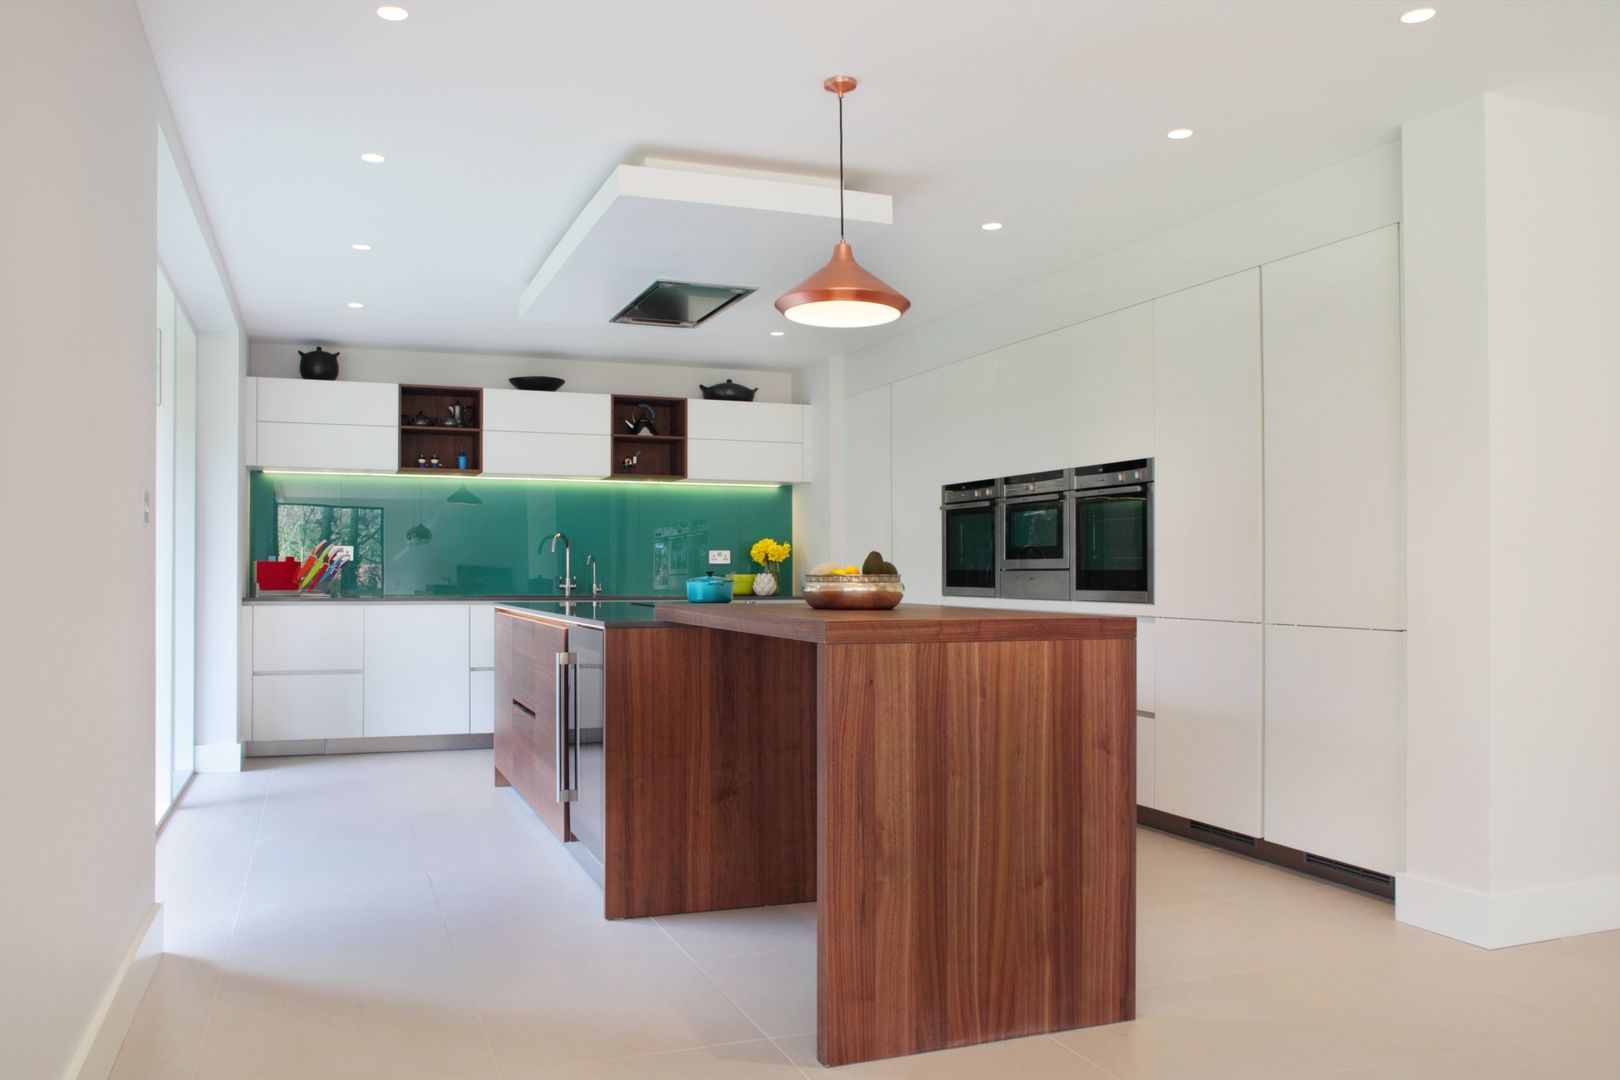 Contemporary Kitchen in Walnut and White Glass in-toto Kitchens Design Studio Marlow مطبخ